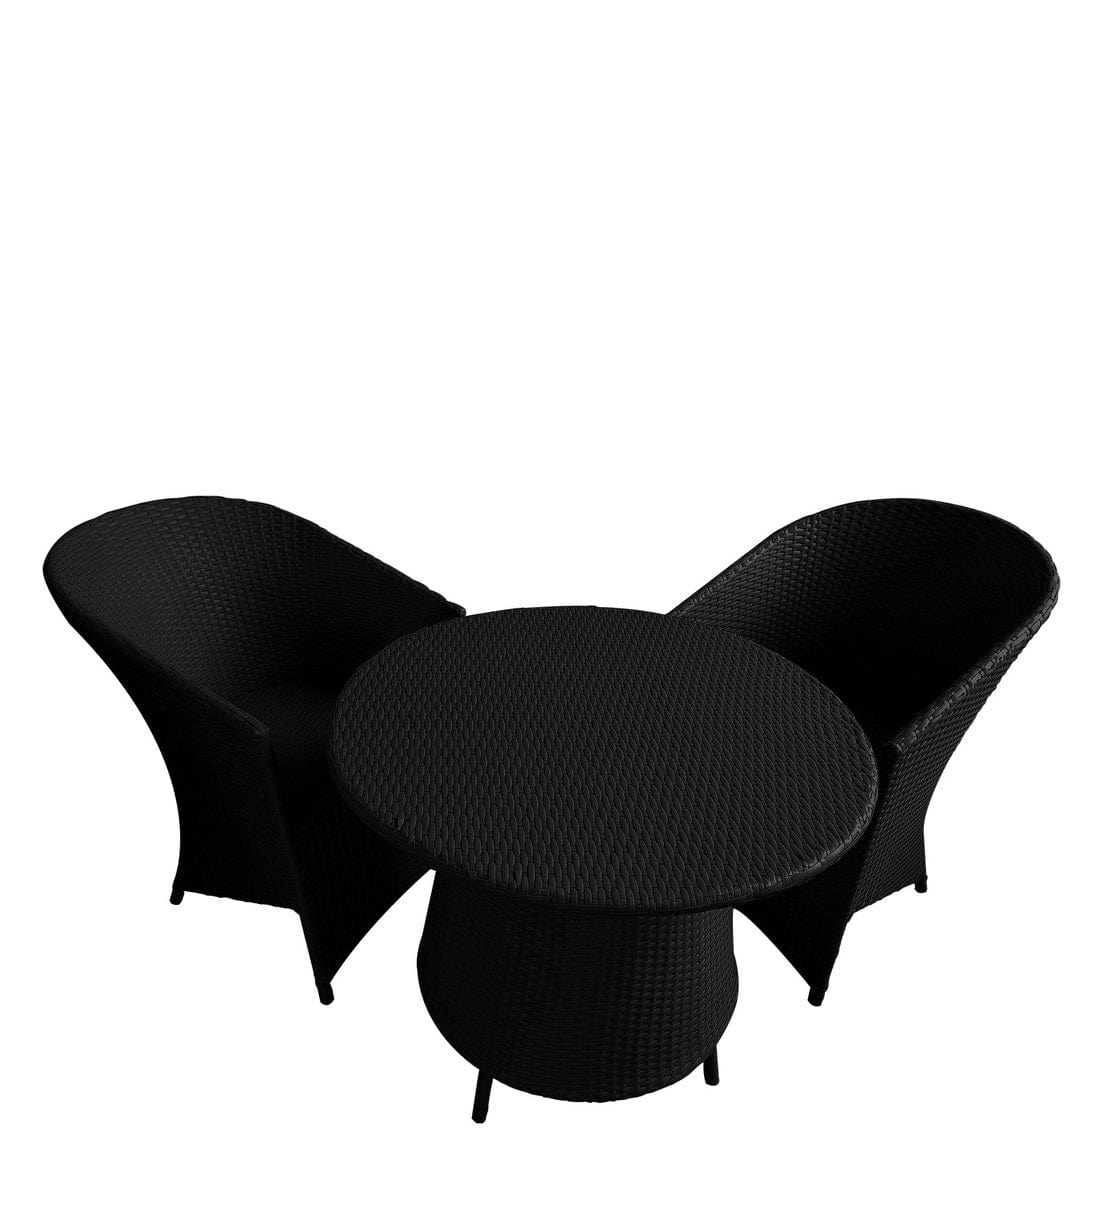 Dreamline Outdoor Garden/Balcony Patio Seating Set 1+2, 2 Chairs And 1 Round Shaped Table (Easy To Handle, Black)